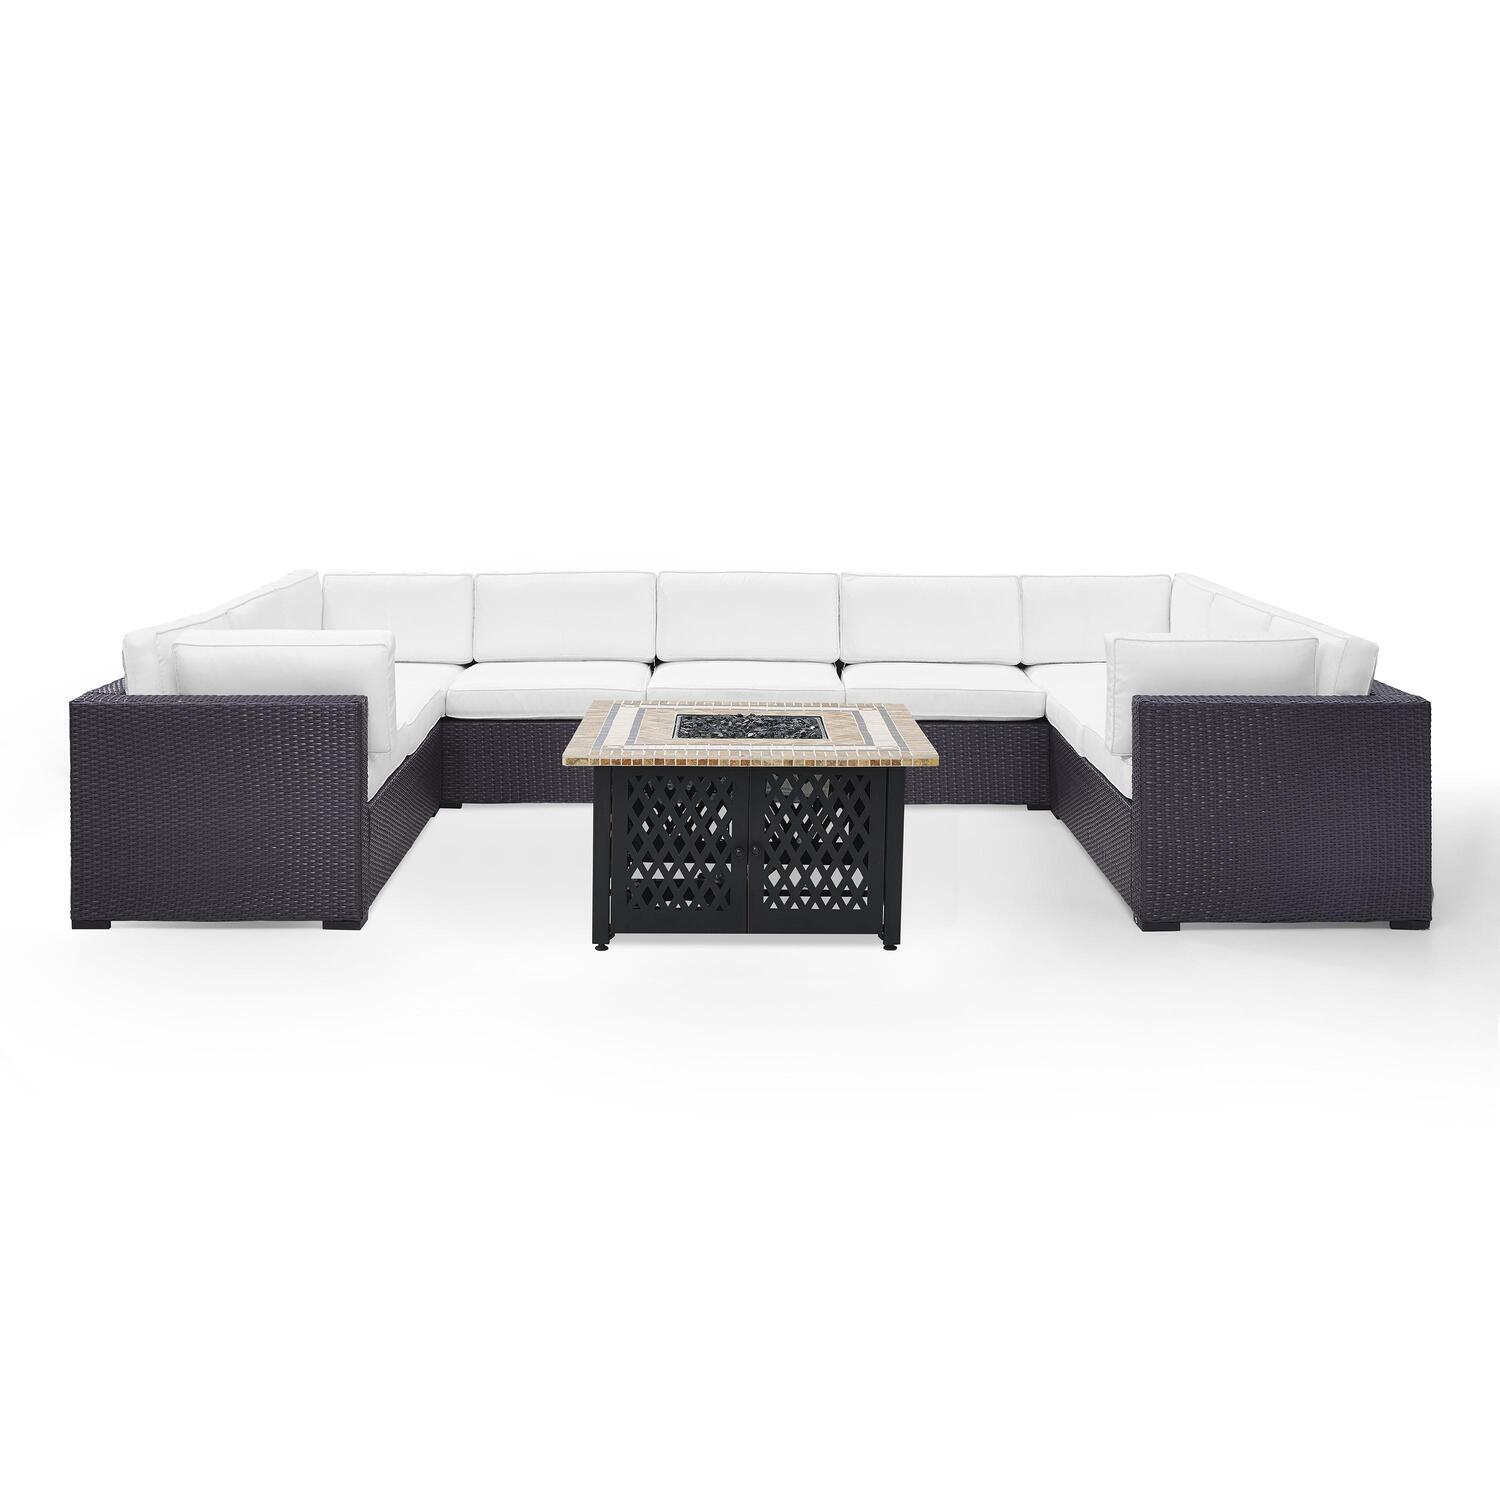 Crosley Furniture Biscayne 6PC Fabric Patio Fire Pit Sectional Set in White - image 1 of 4